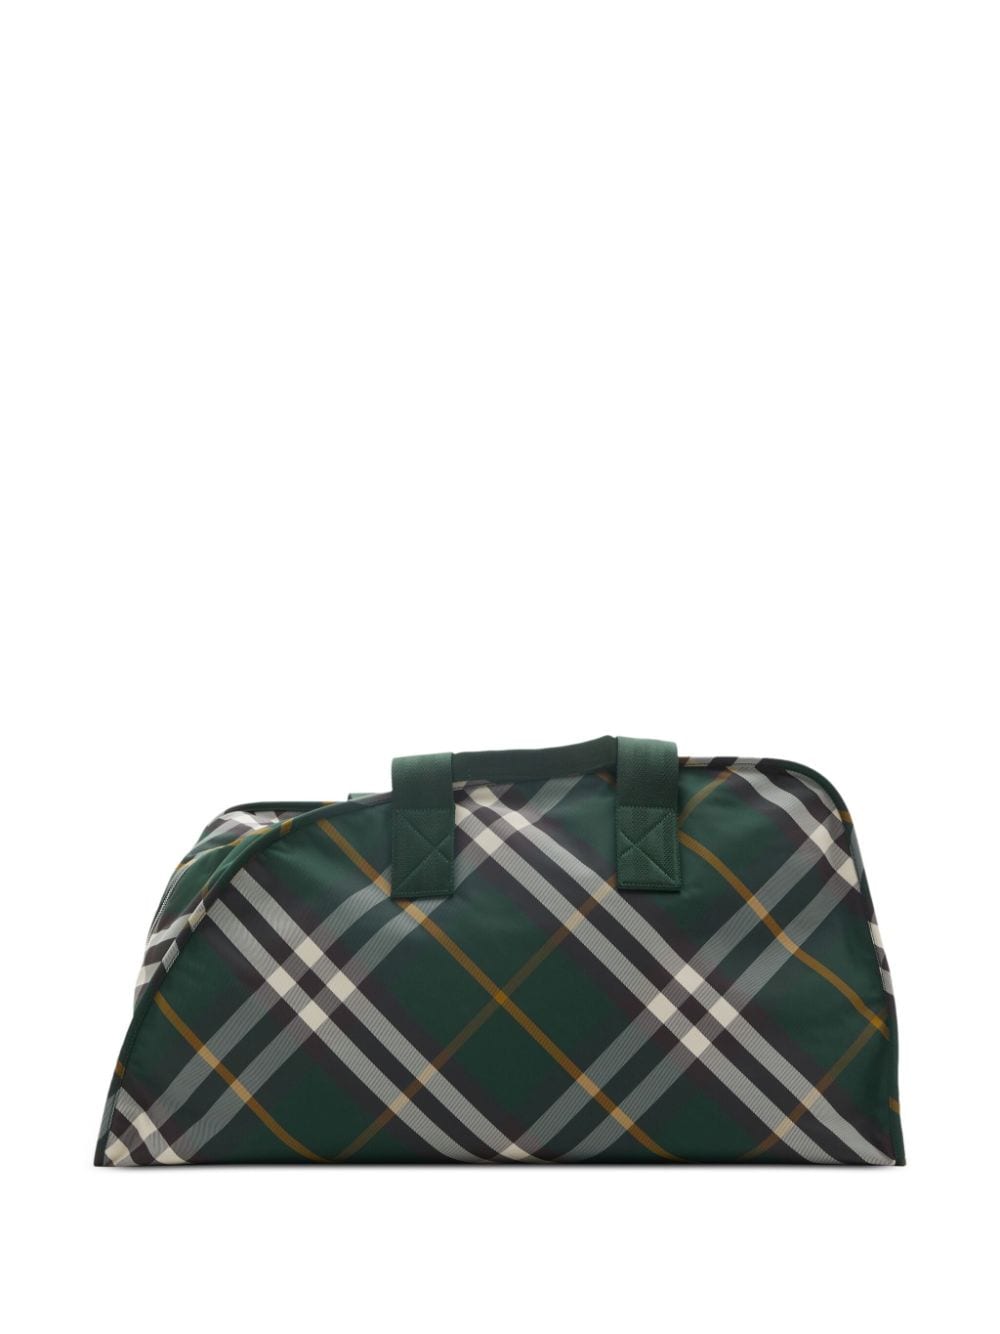 Burberry large Shield check-pattern duffle bag - Green von Burberry